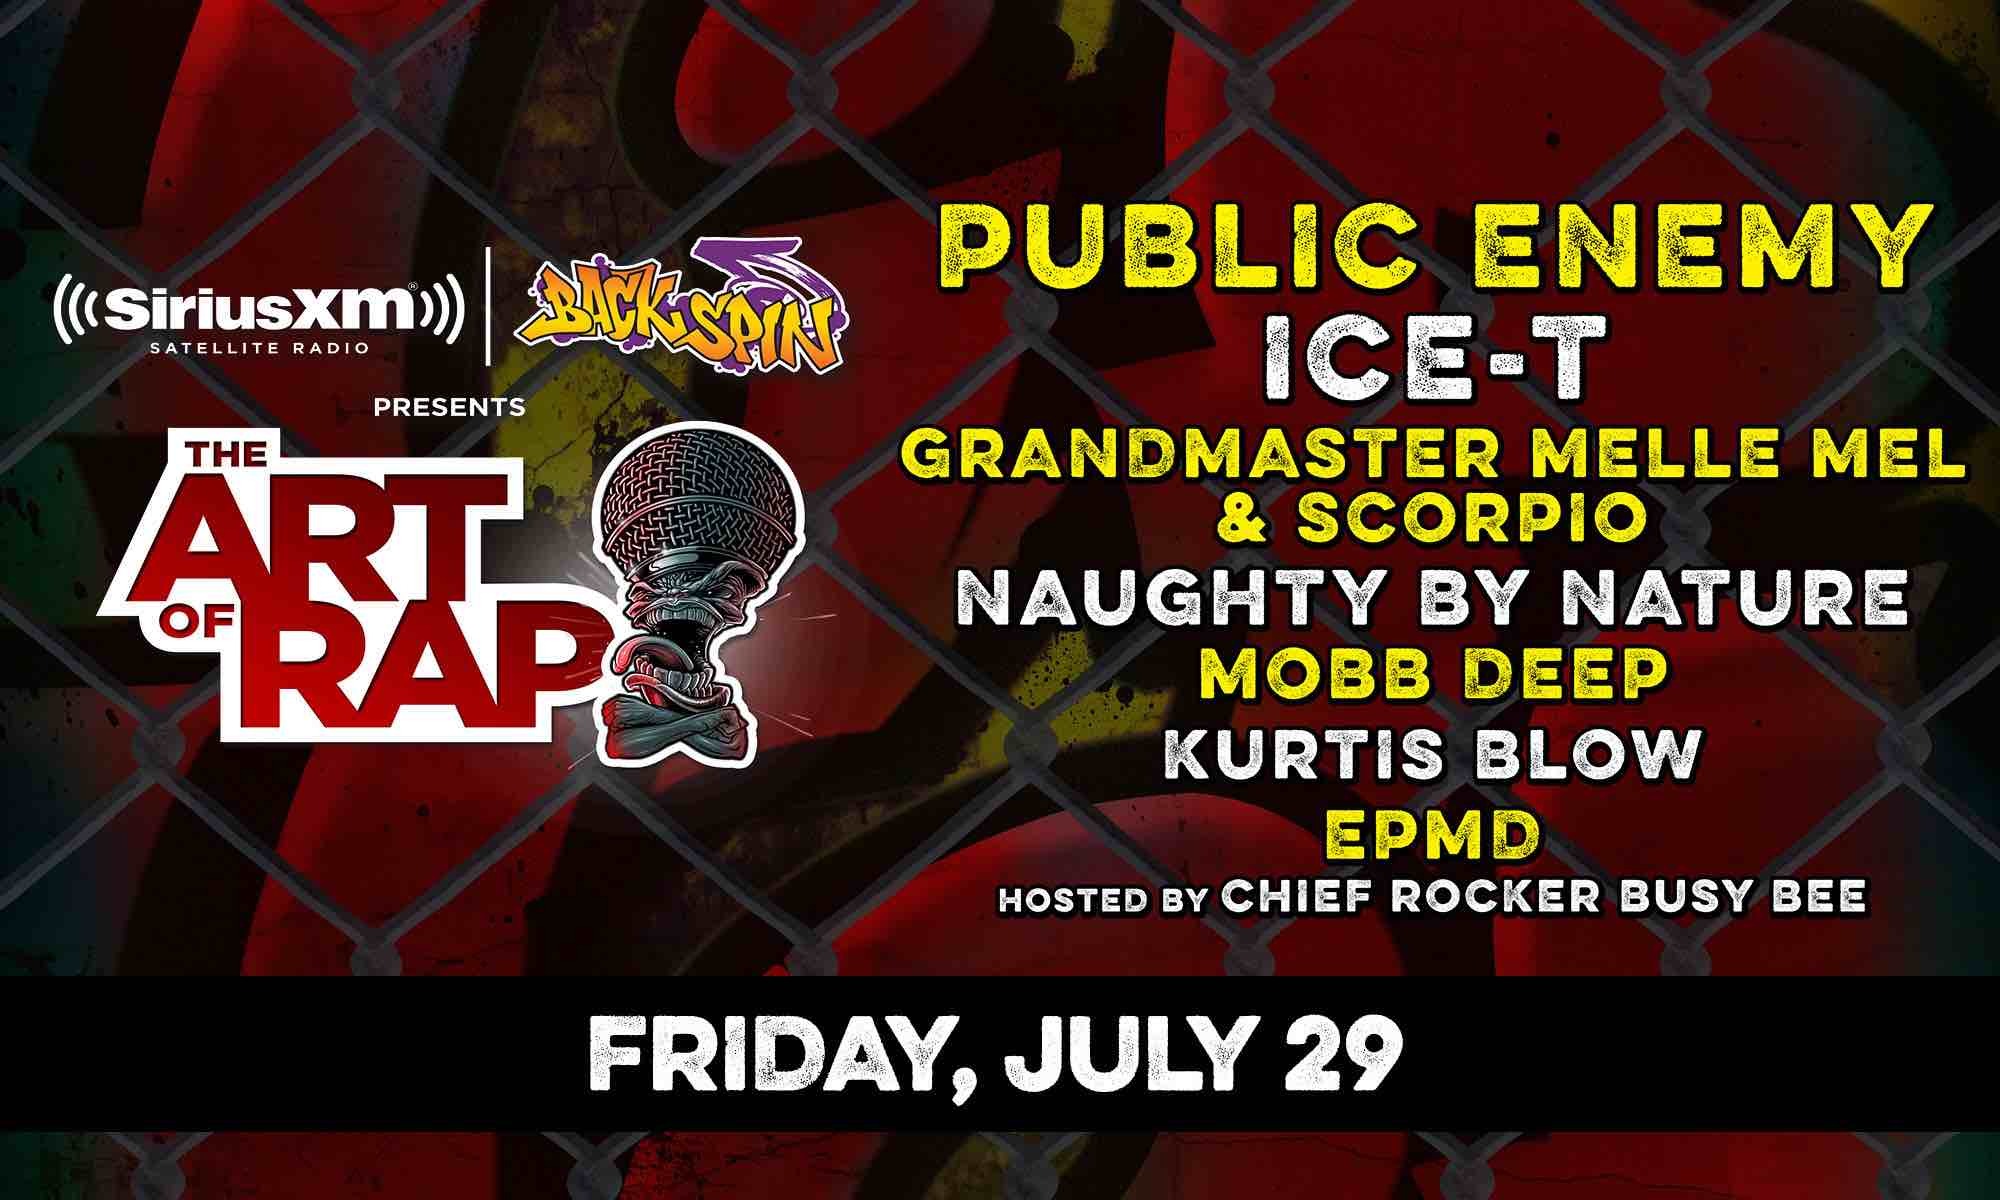 SiriusXM Backspin Presents The Art of Rap Festival Public Enemy, Ice T, Grandmaster Melle Mel and Scorpio, Naughty by Nature, Mobb Deep, Kurtis Blow, EPMD Live Concert